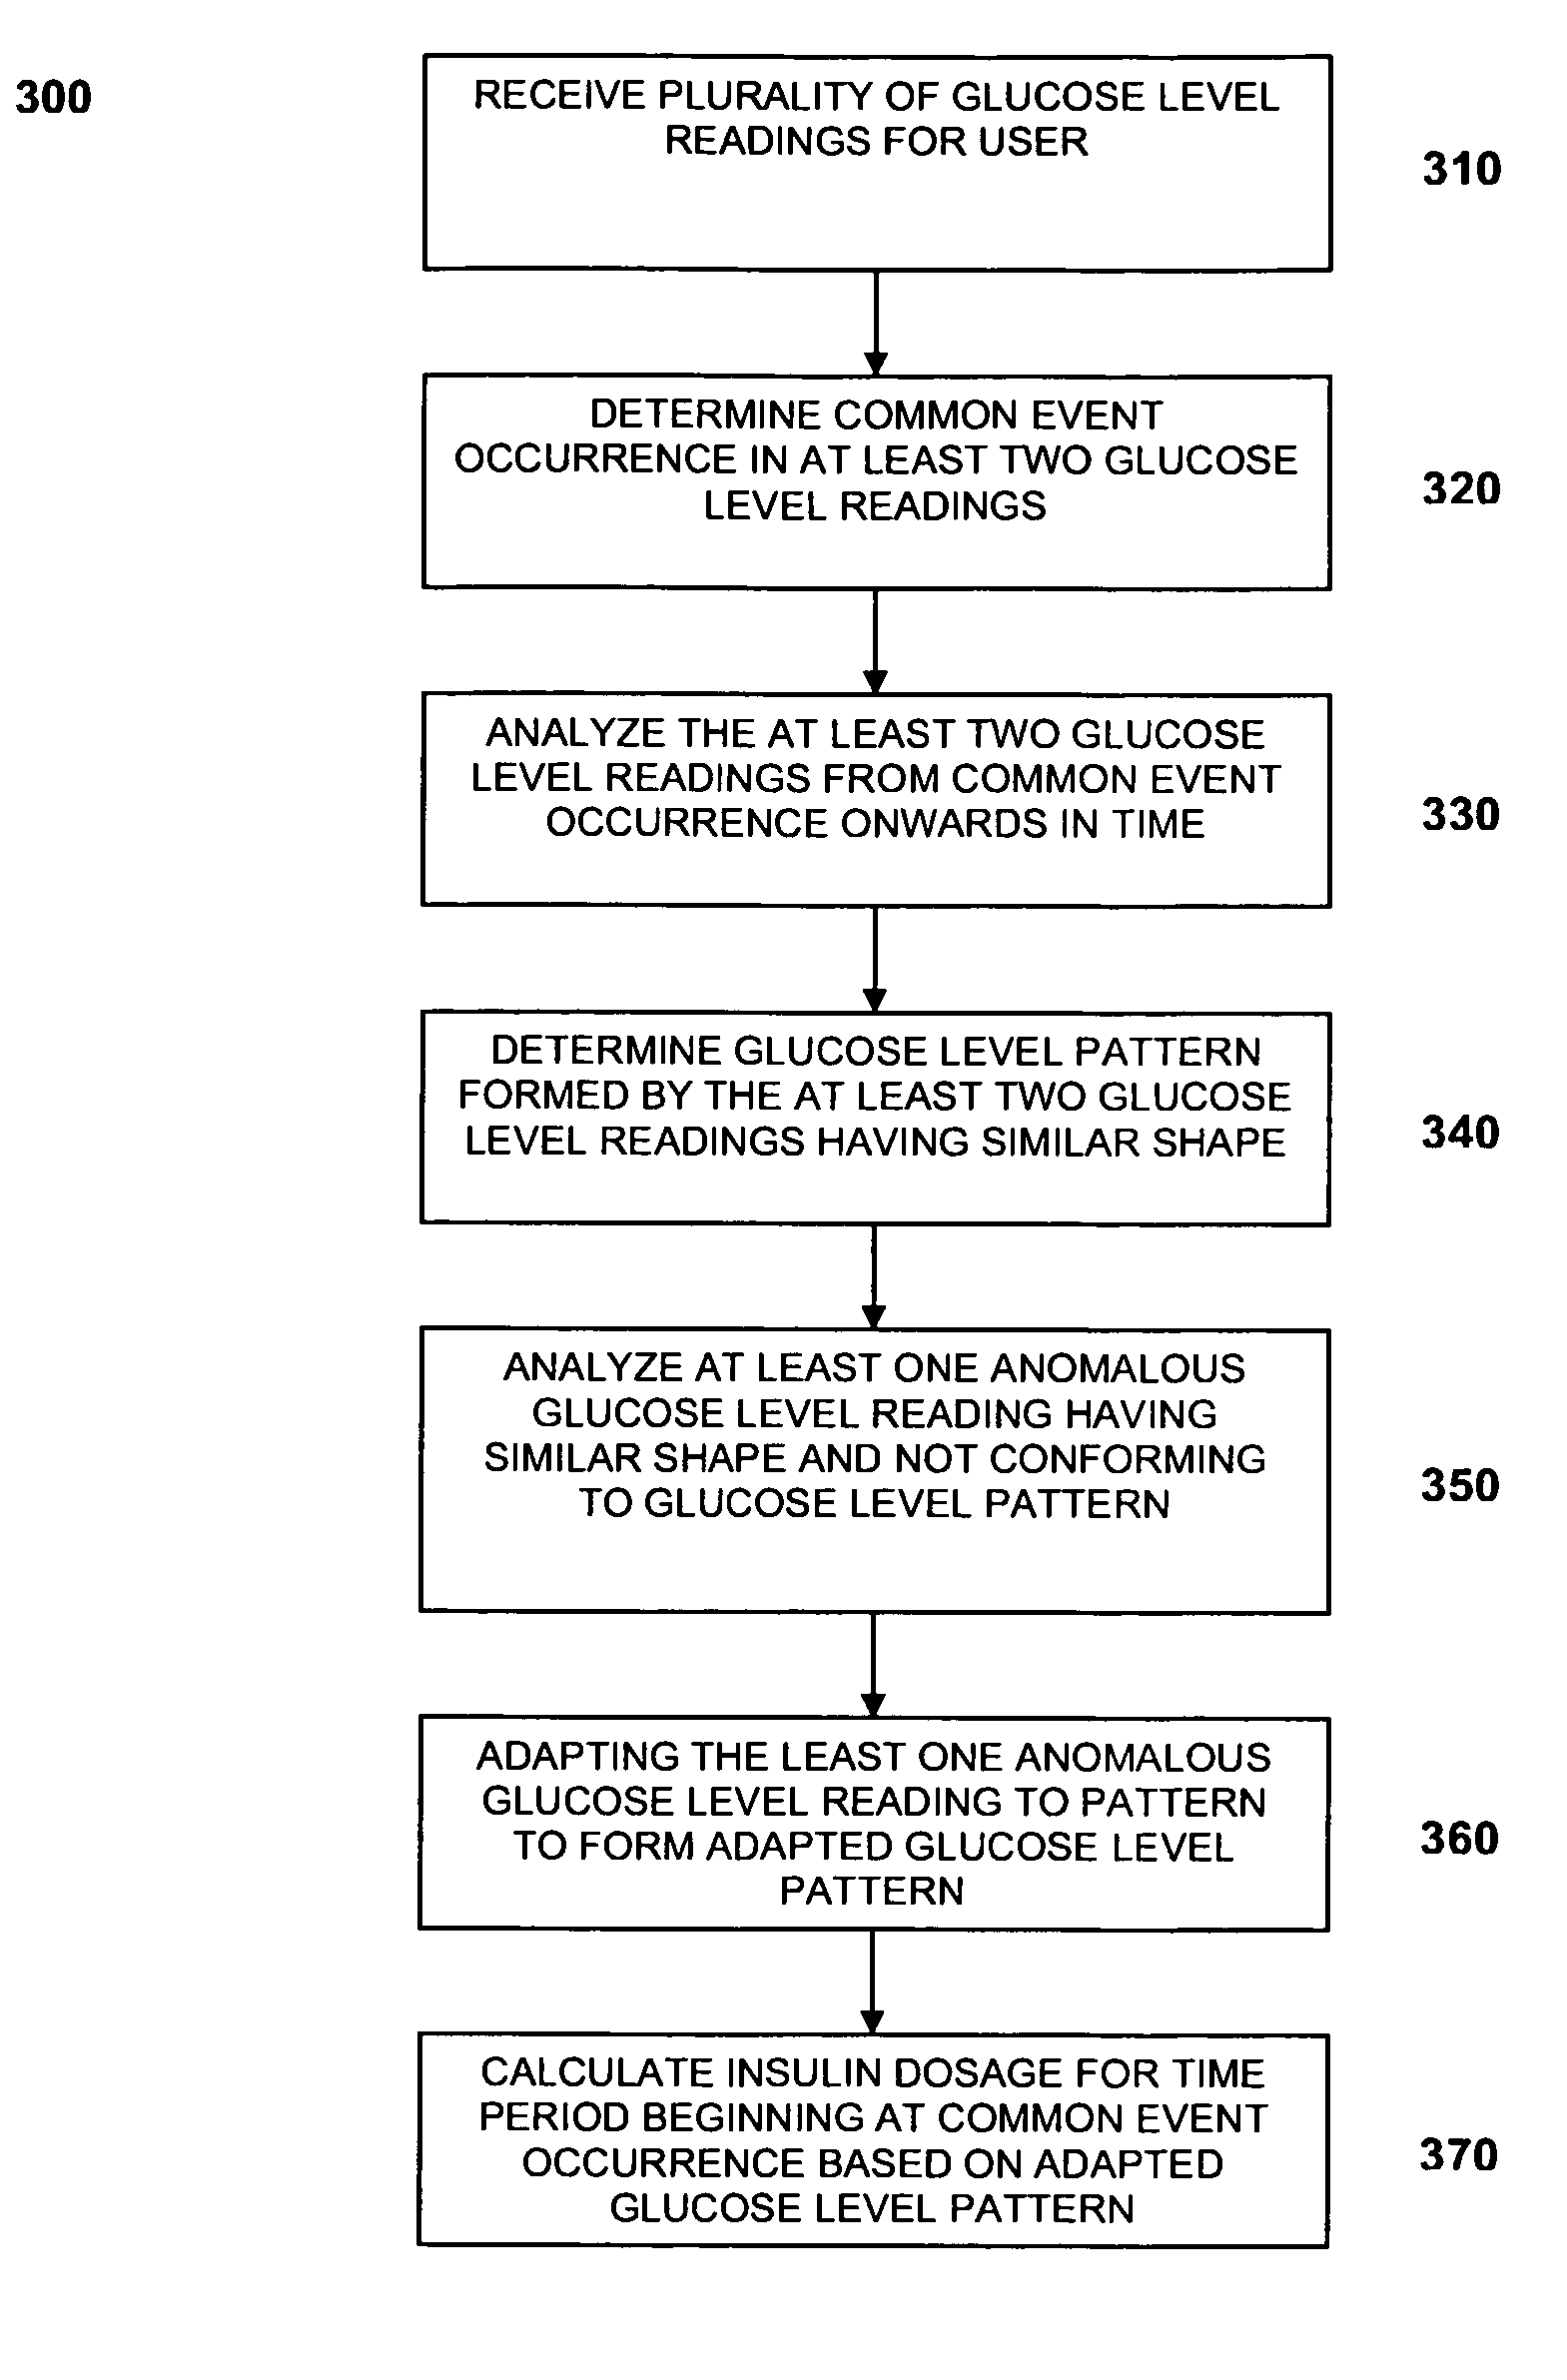 Pattern recognition and filtering in a therapy management system